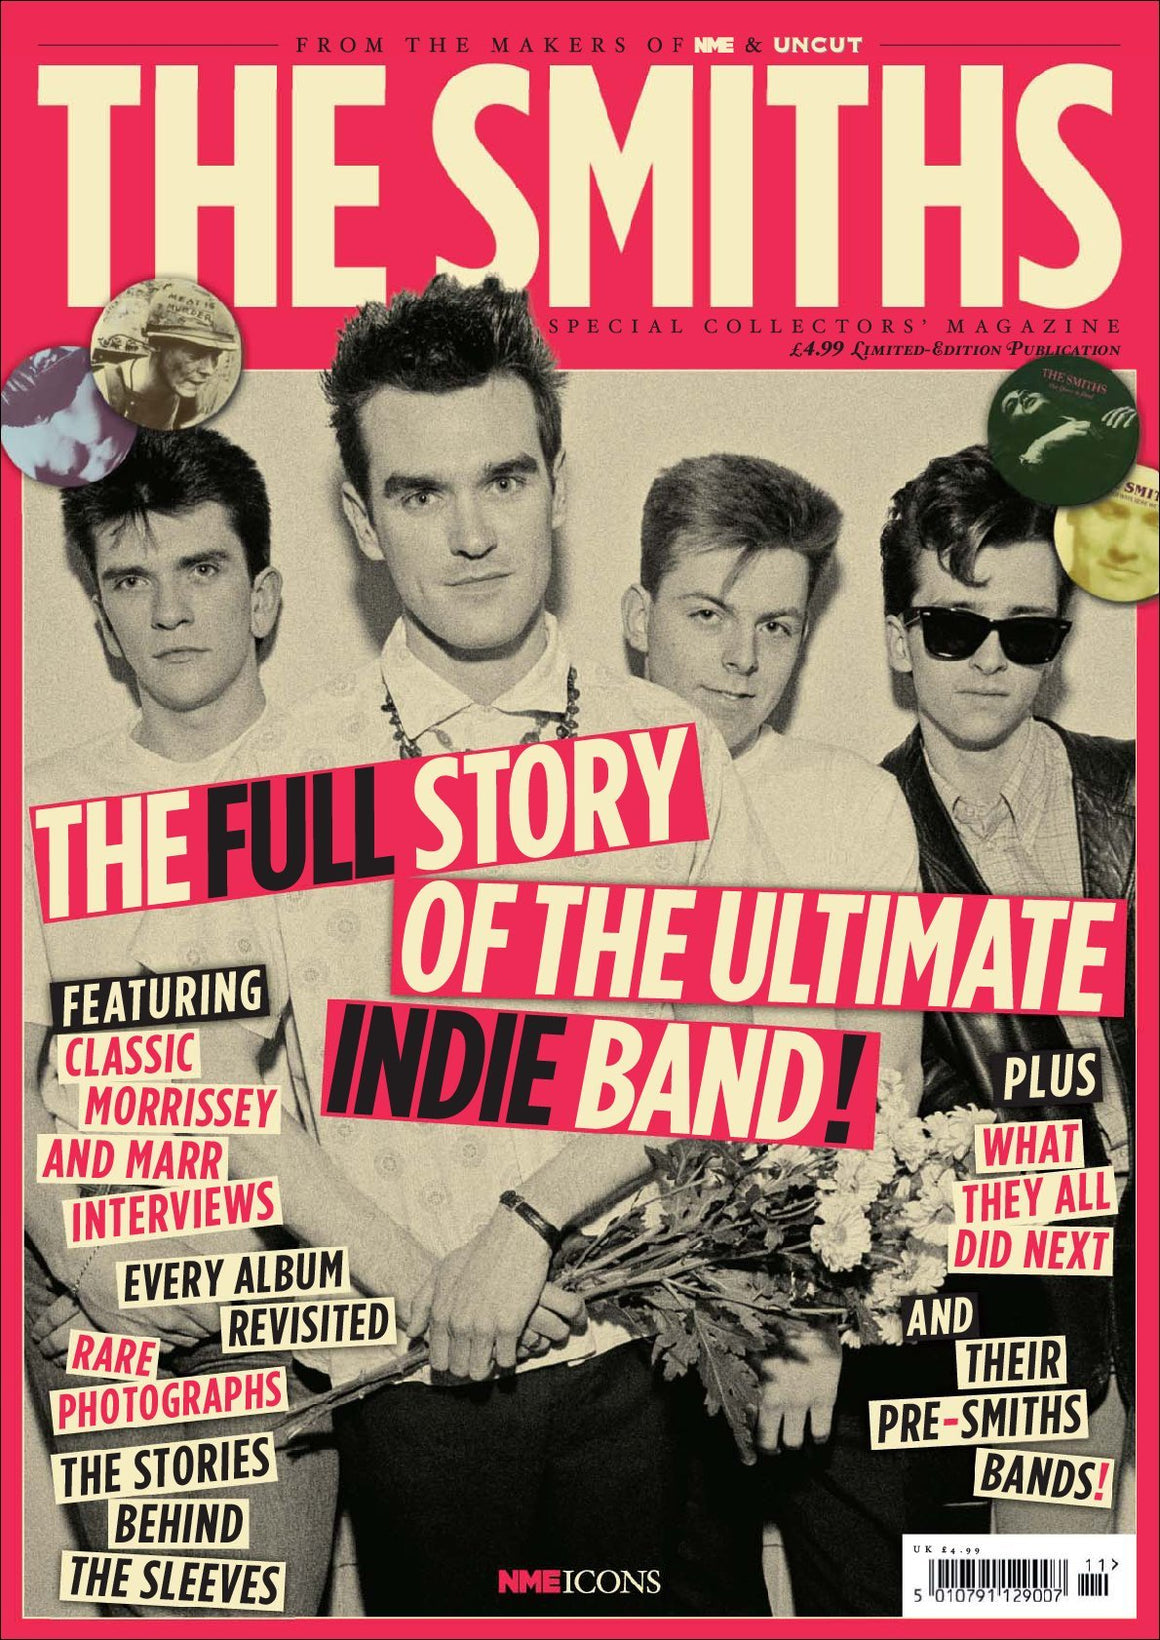 NME Icons magazine - The Smiths cover (November 2015) 98 page special - Morrissey